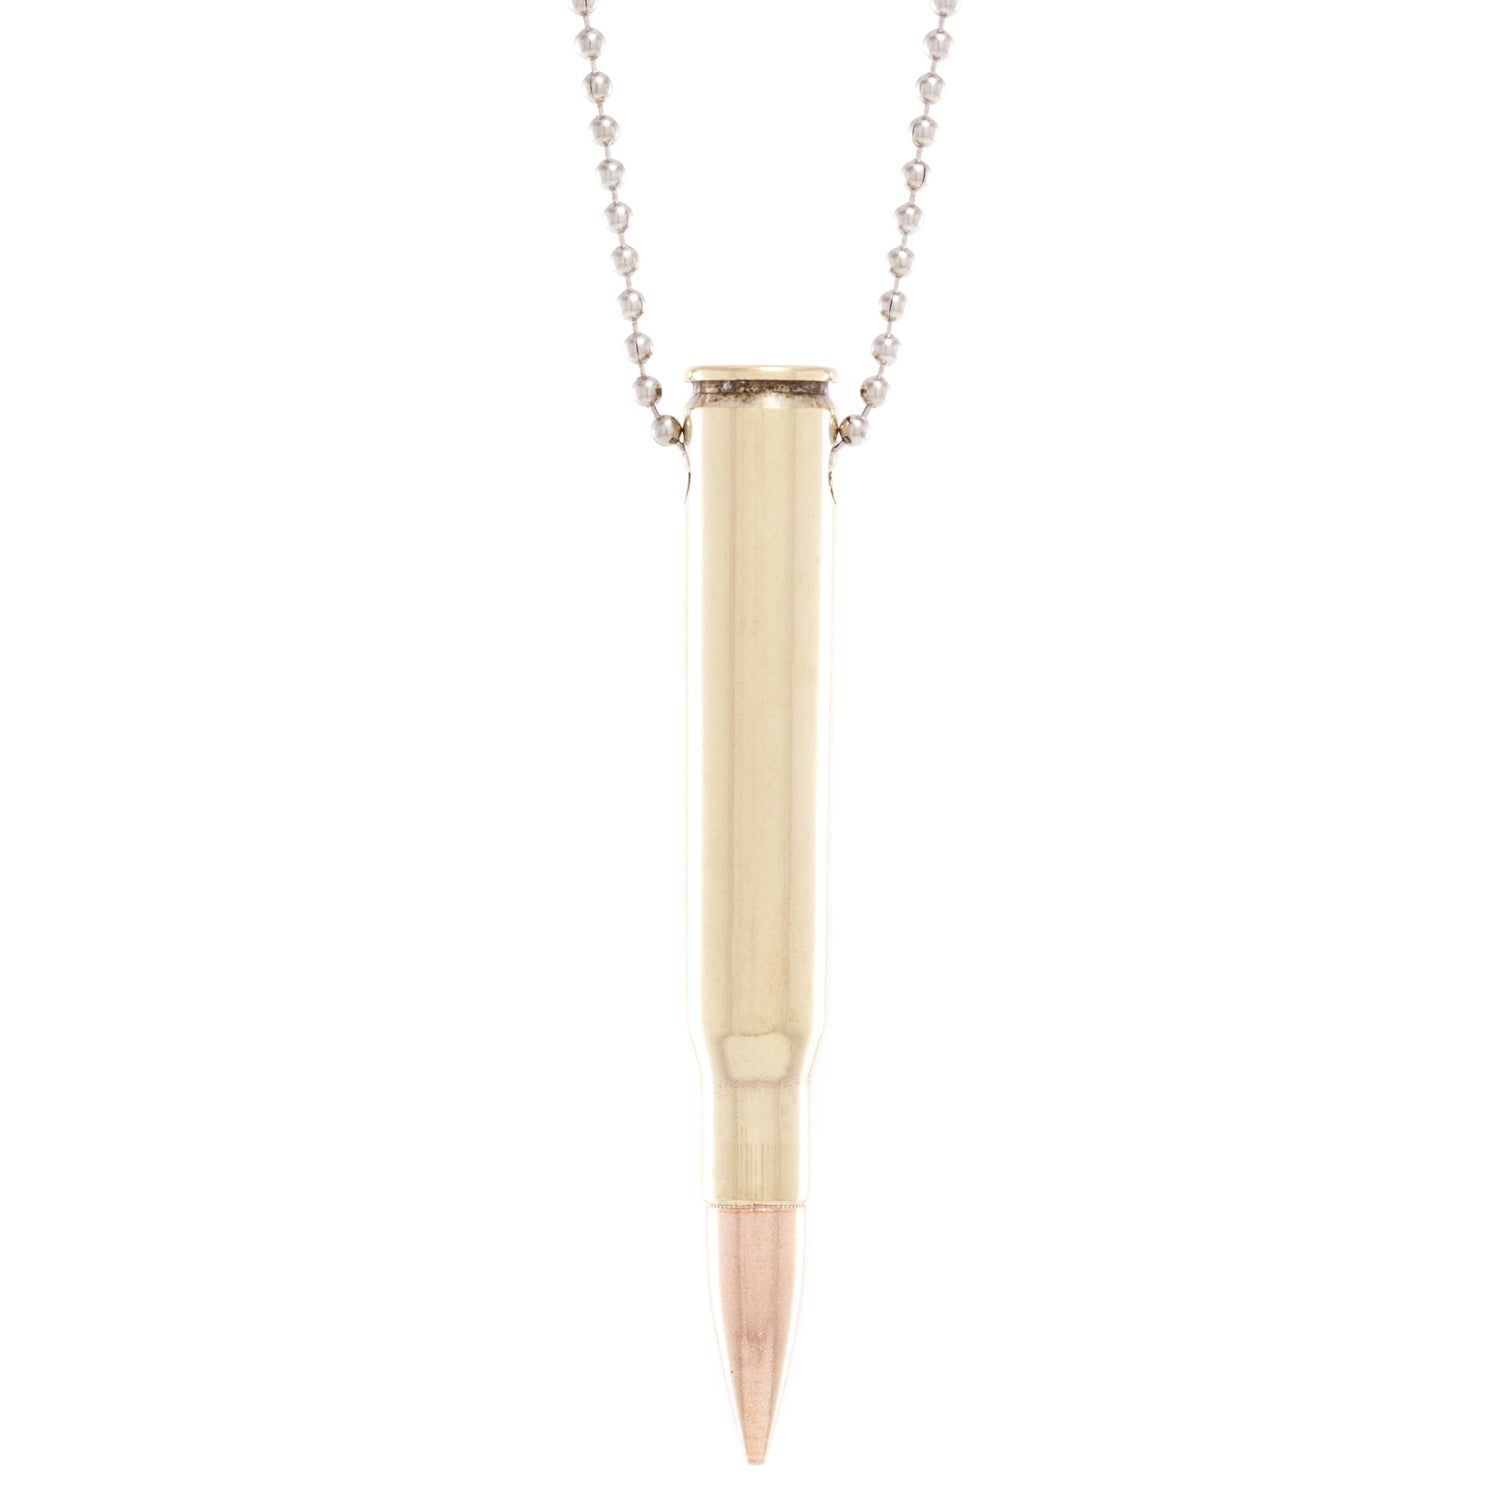 Shots fired by Lucky Shot USA .30-06 Springfield Ball Chain Bullet Necklace Kogelketting (60cm)